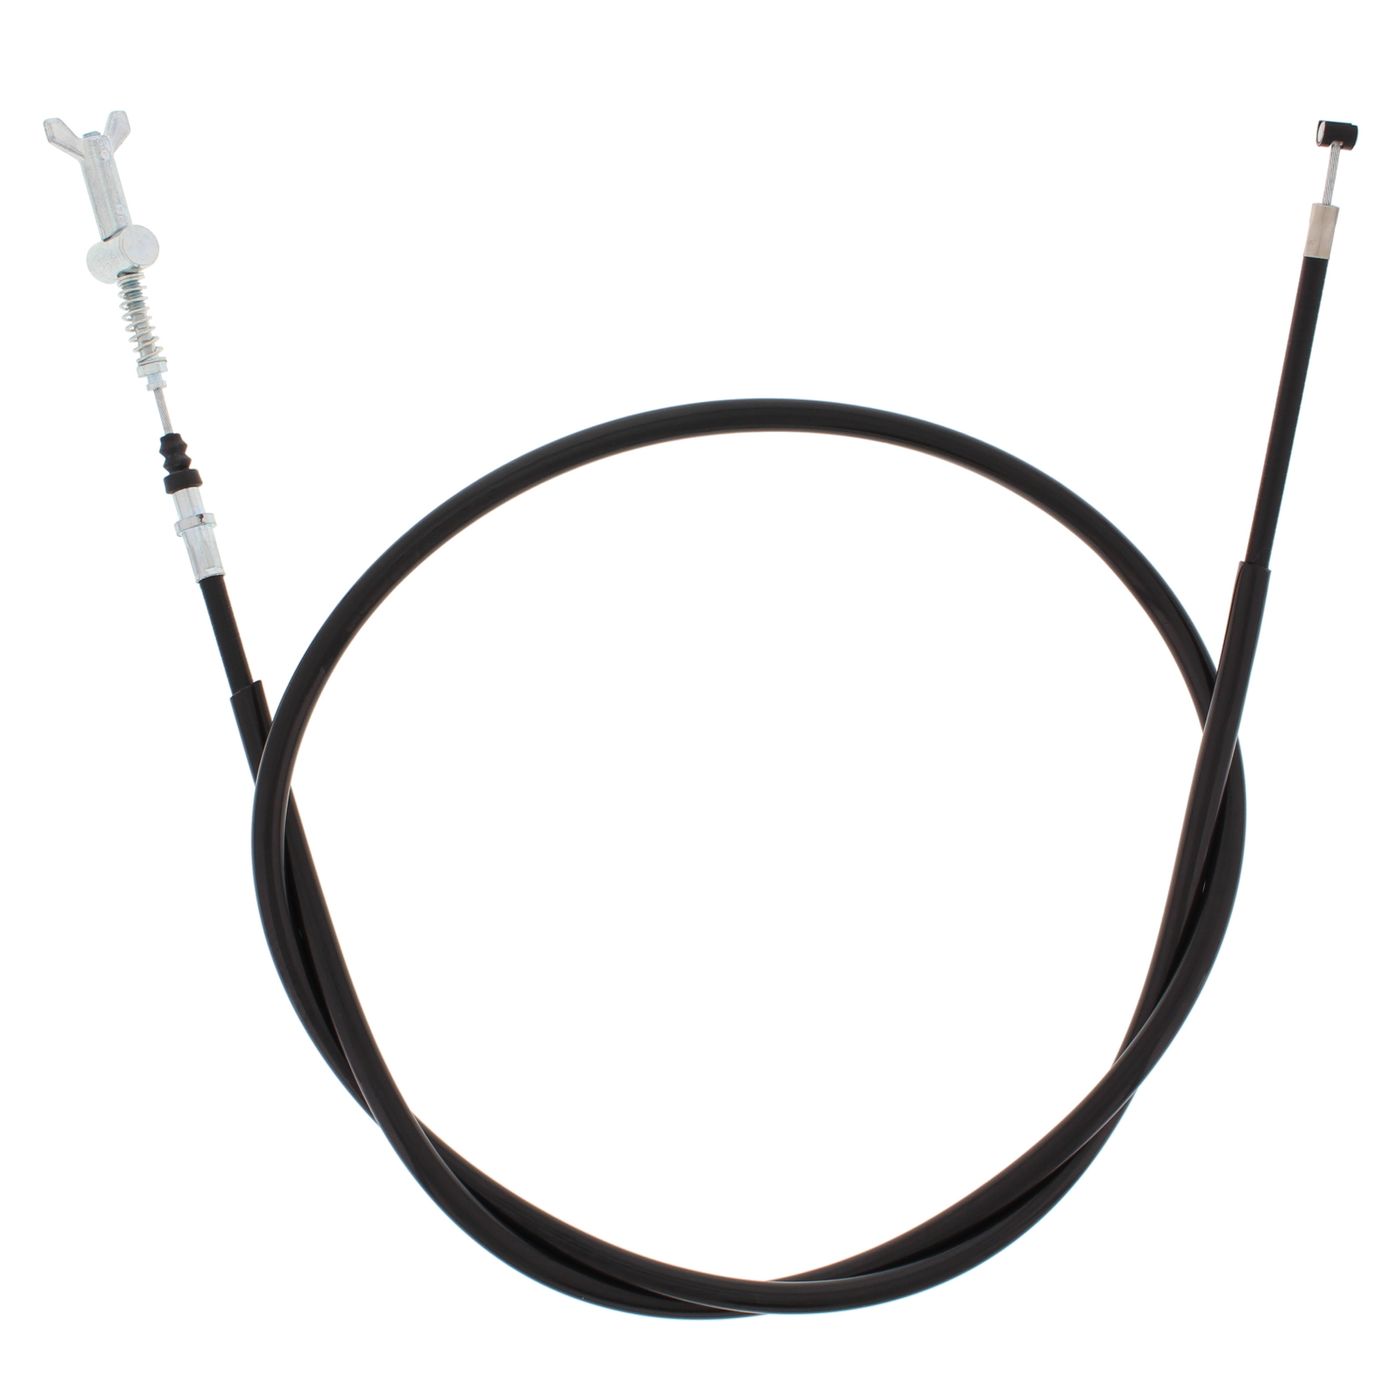 Wrp Brake Cables - WRP454066 image